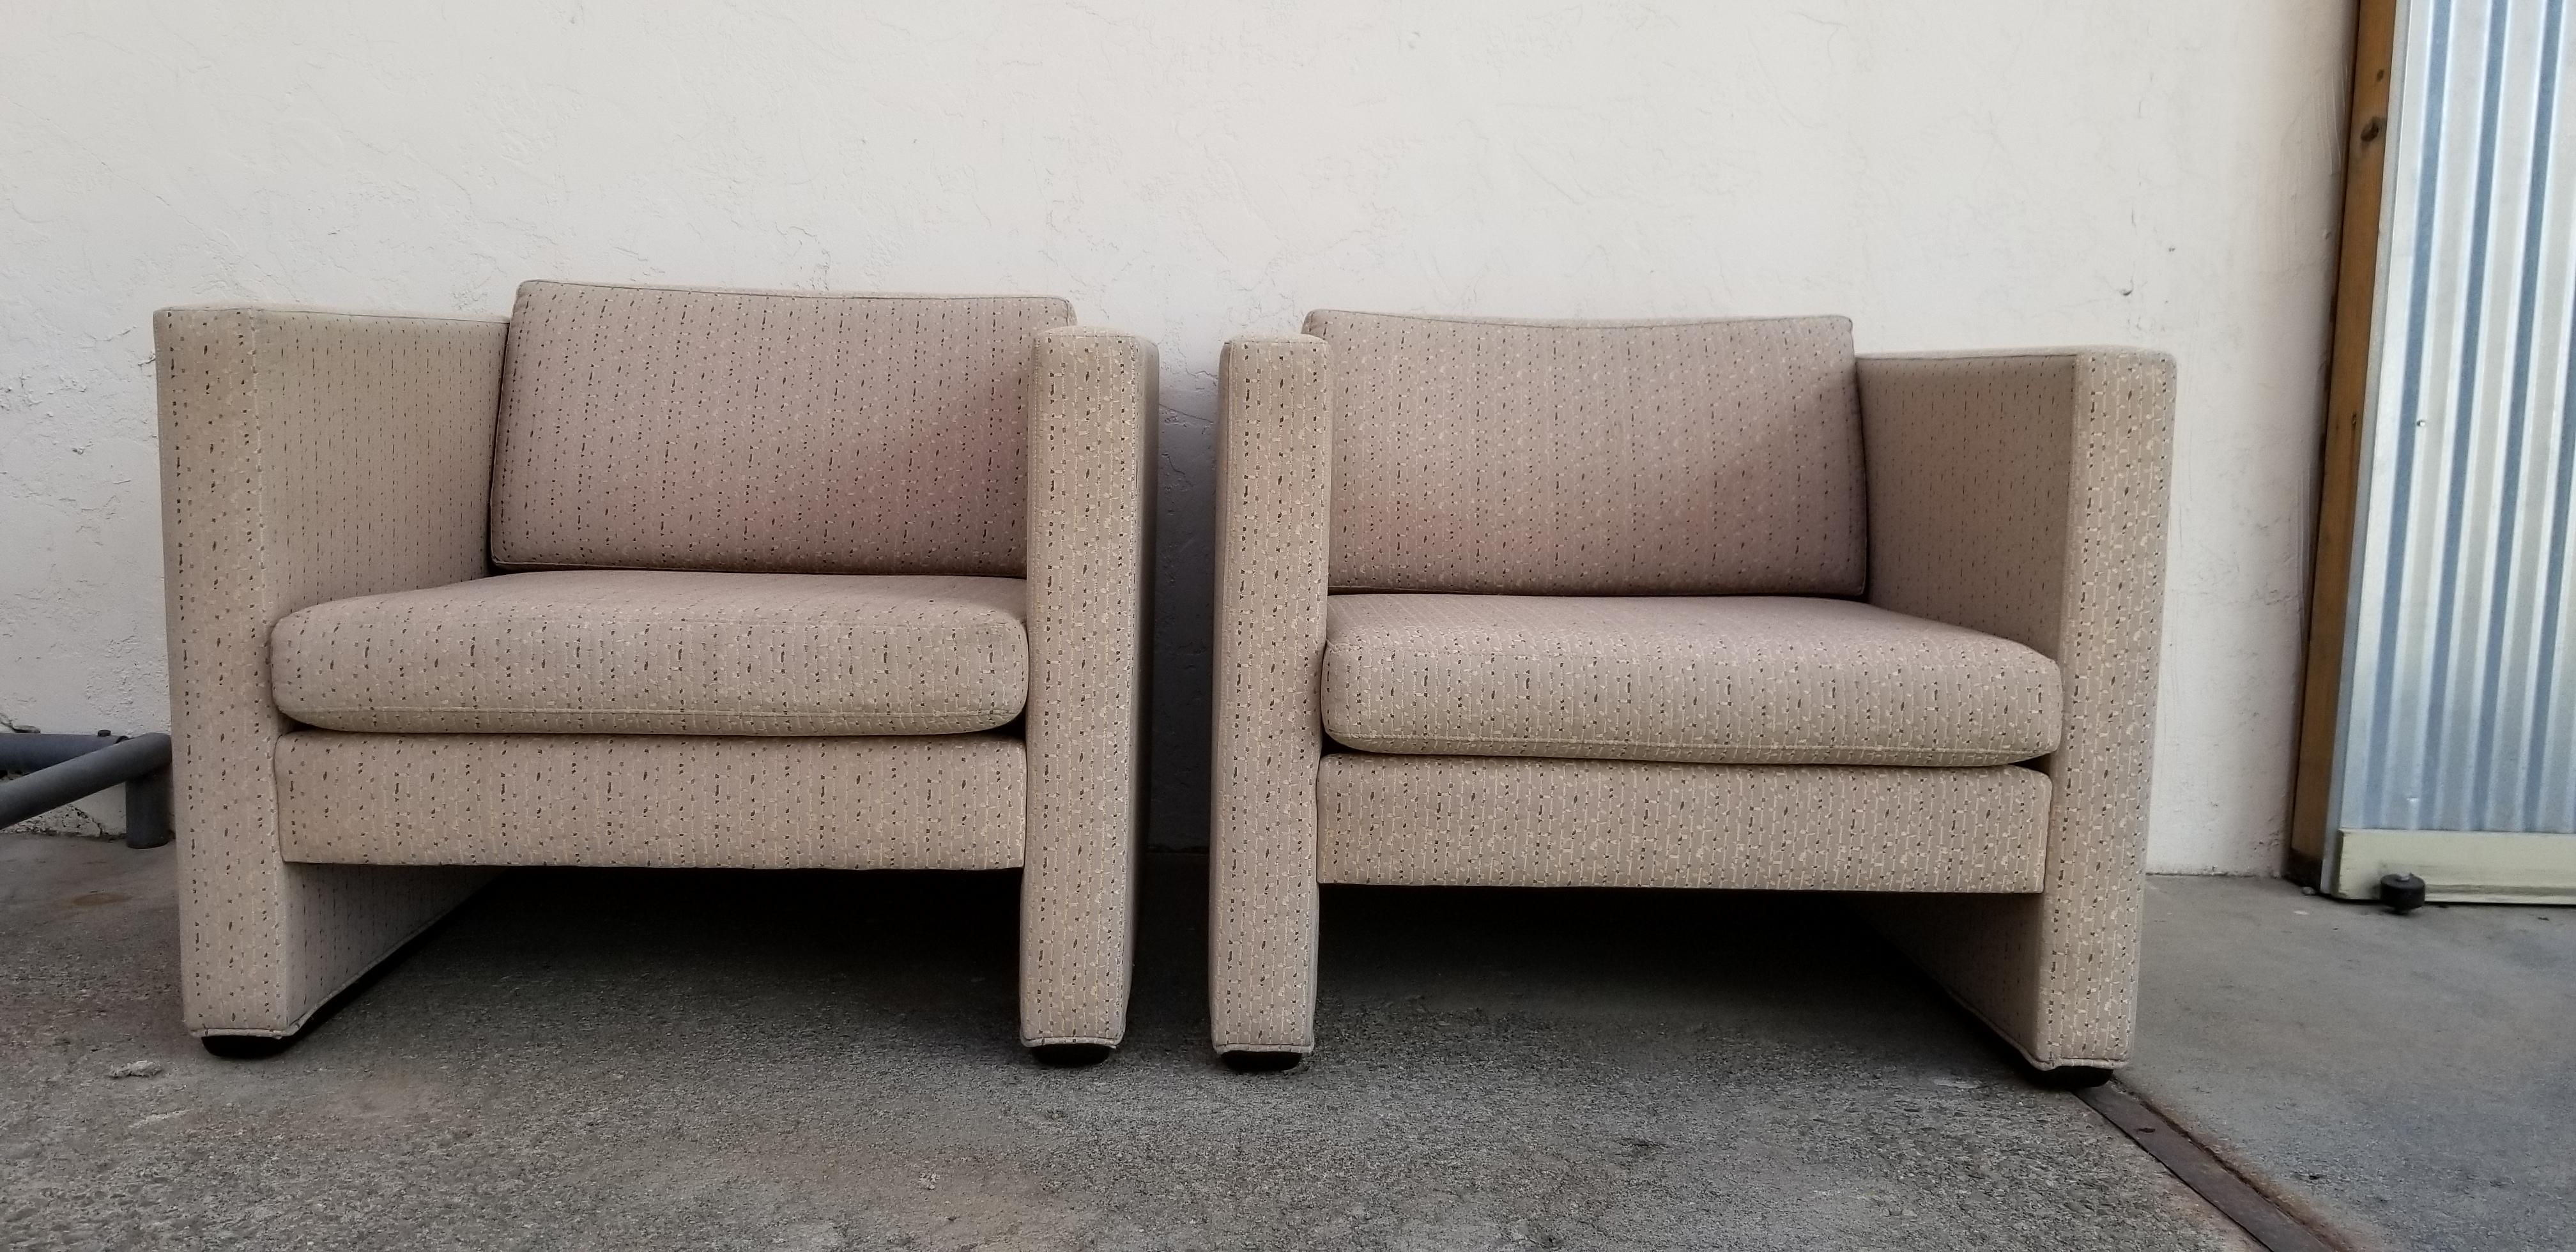 A pair of 1980s upholstered lounge chairs by Jack Cartwright Inc. Square, cubical design with wood base. Reversible cushions. Original fabric in excellent condition. Retaining label, dated 1989.